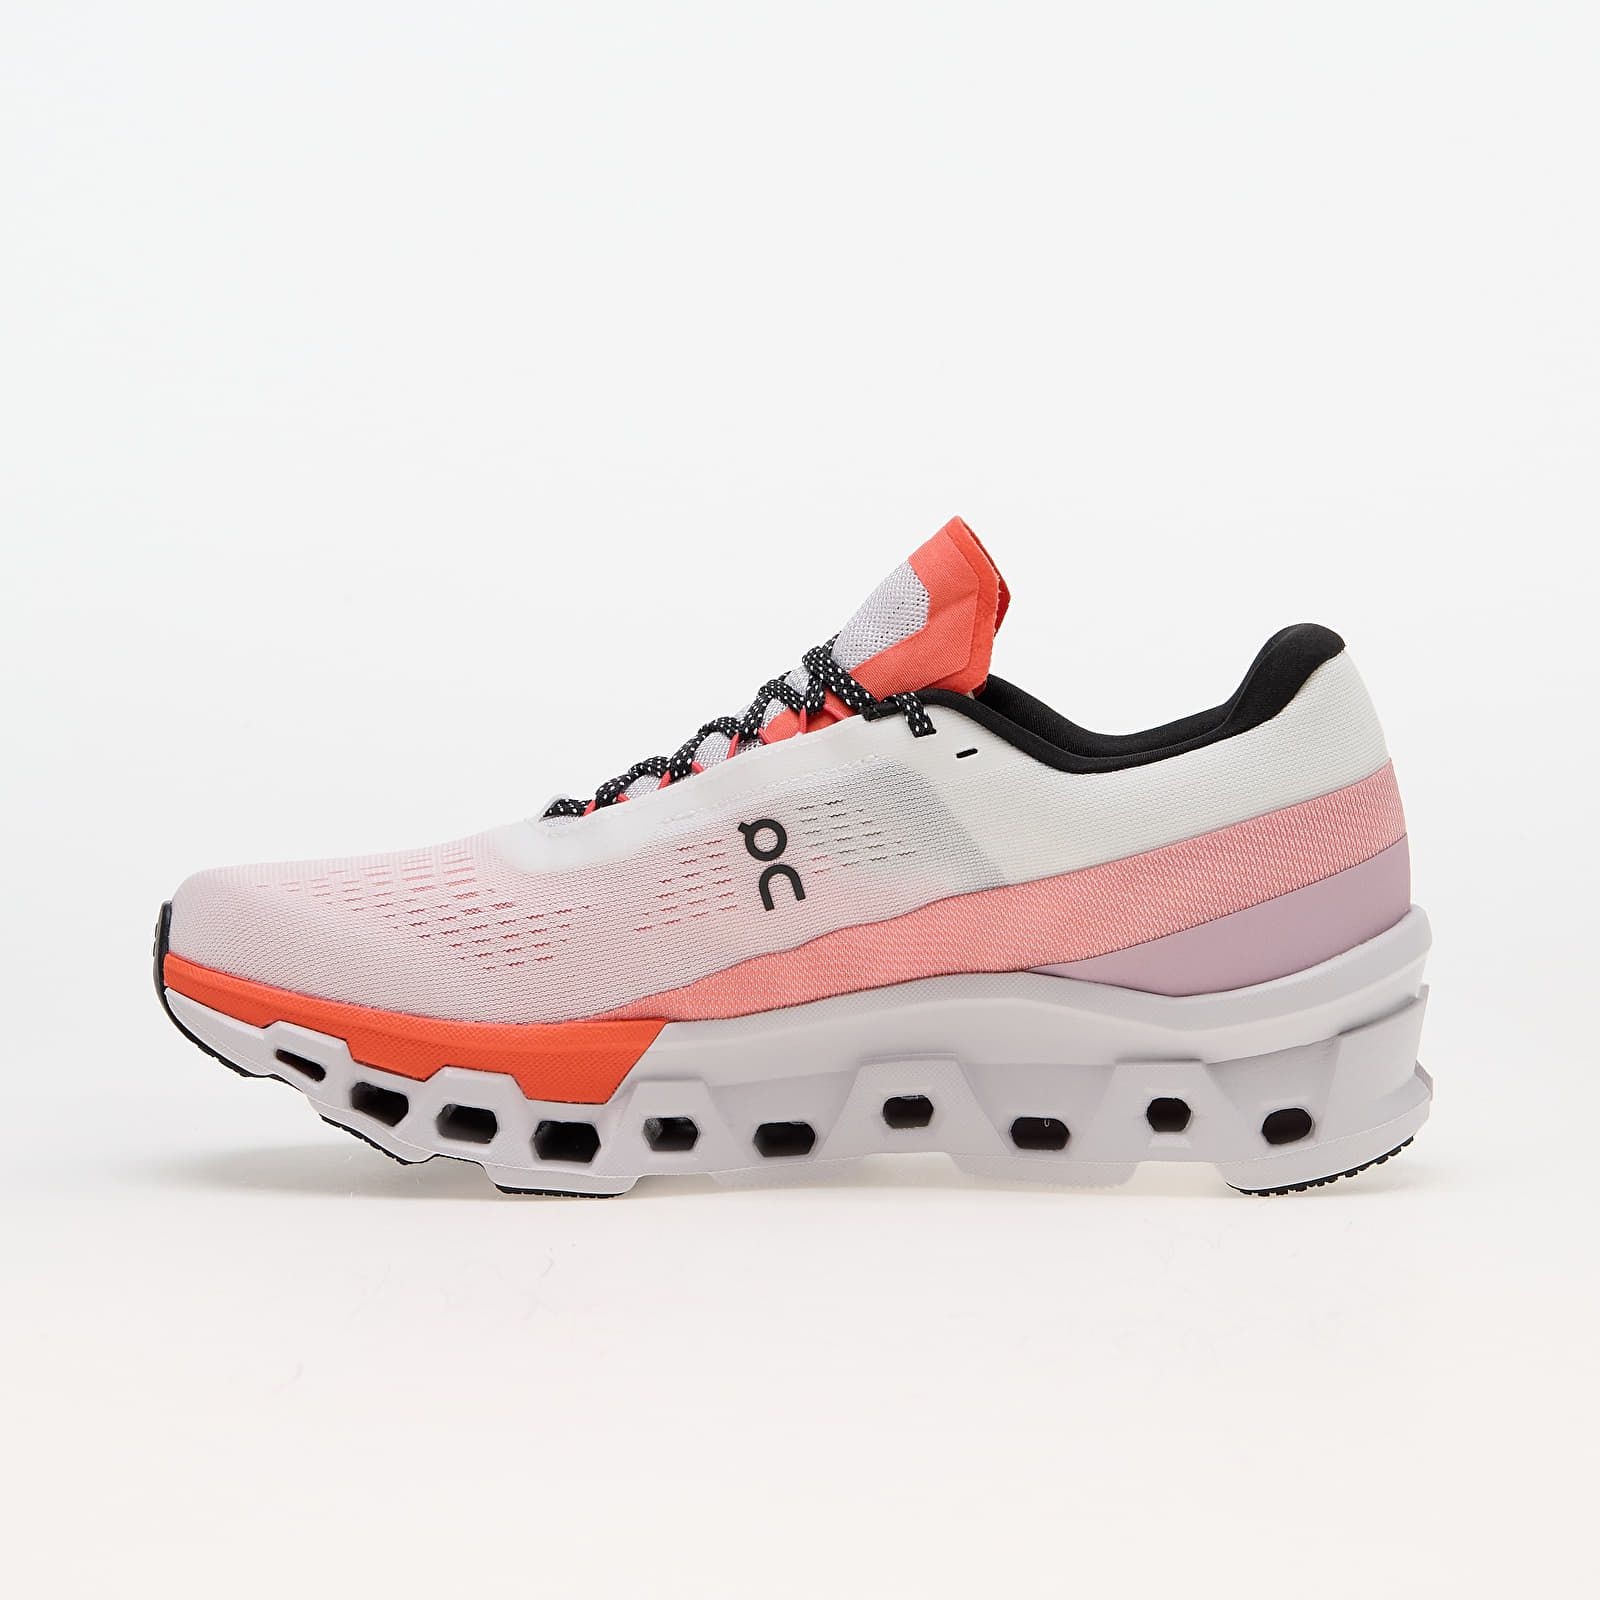 Running Shoes -  on Cloudmonster 2 W